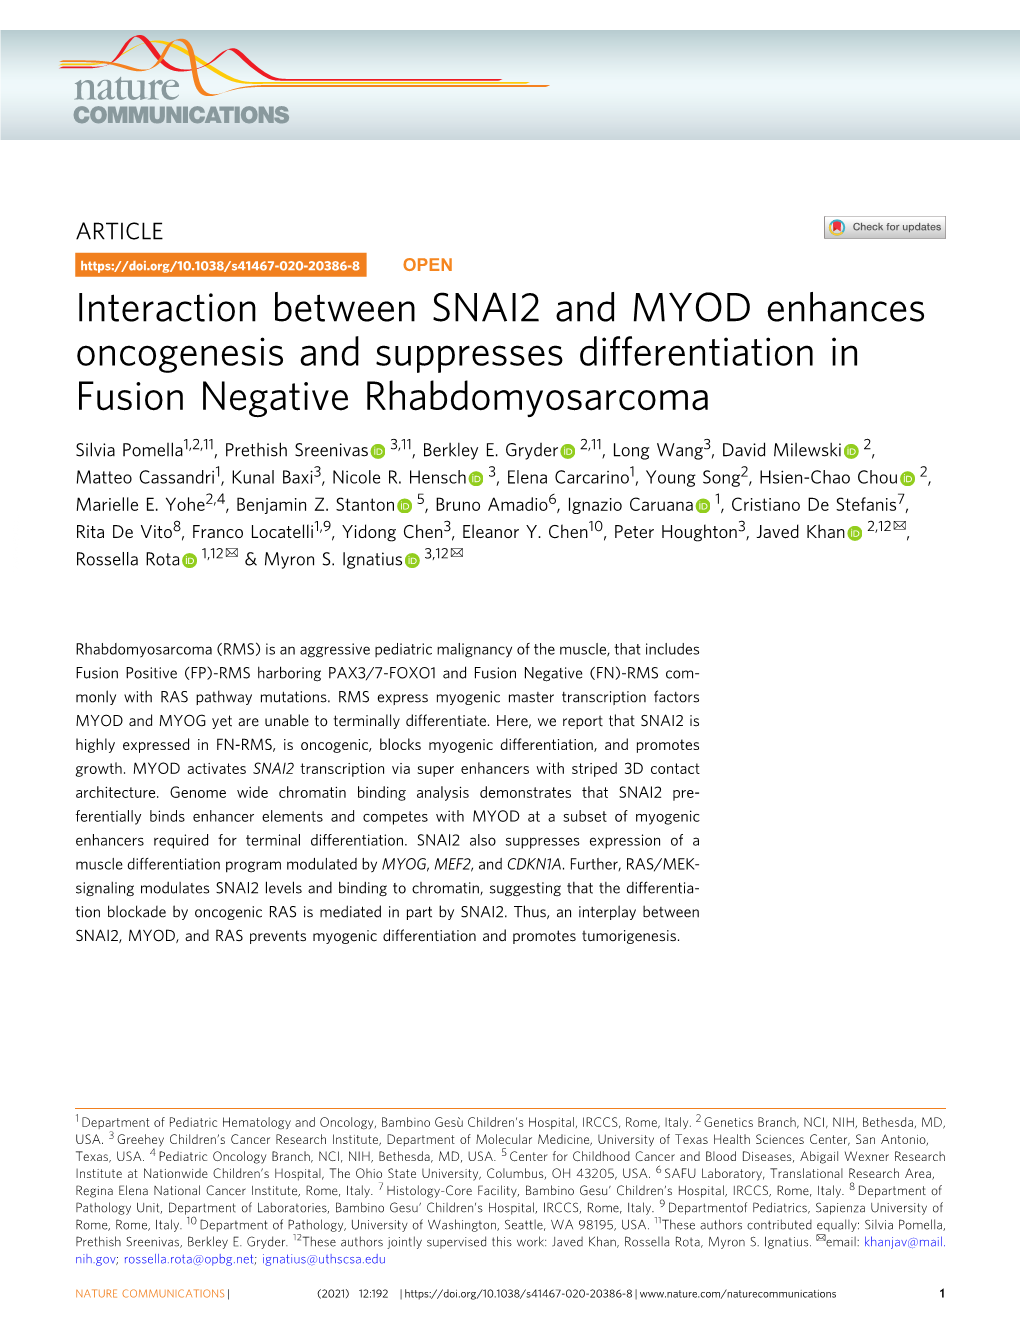 Interaction Between SNAI2 and MYOD Enhances Oncogenesis and Suppresses Differentiation in Fusion Negative Rhabdomyosarcoma